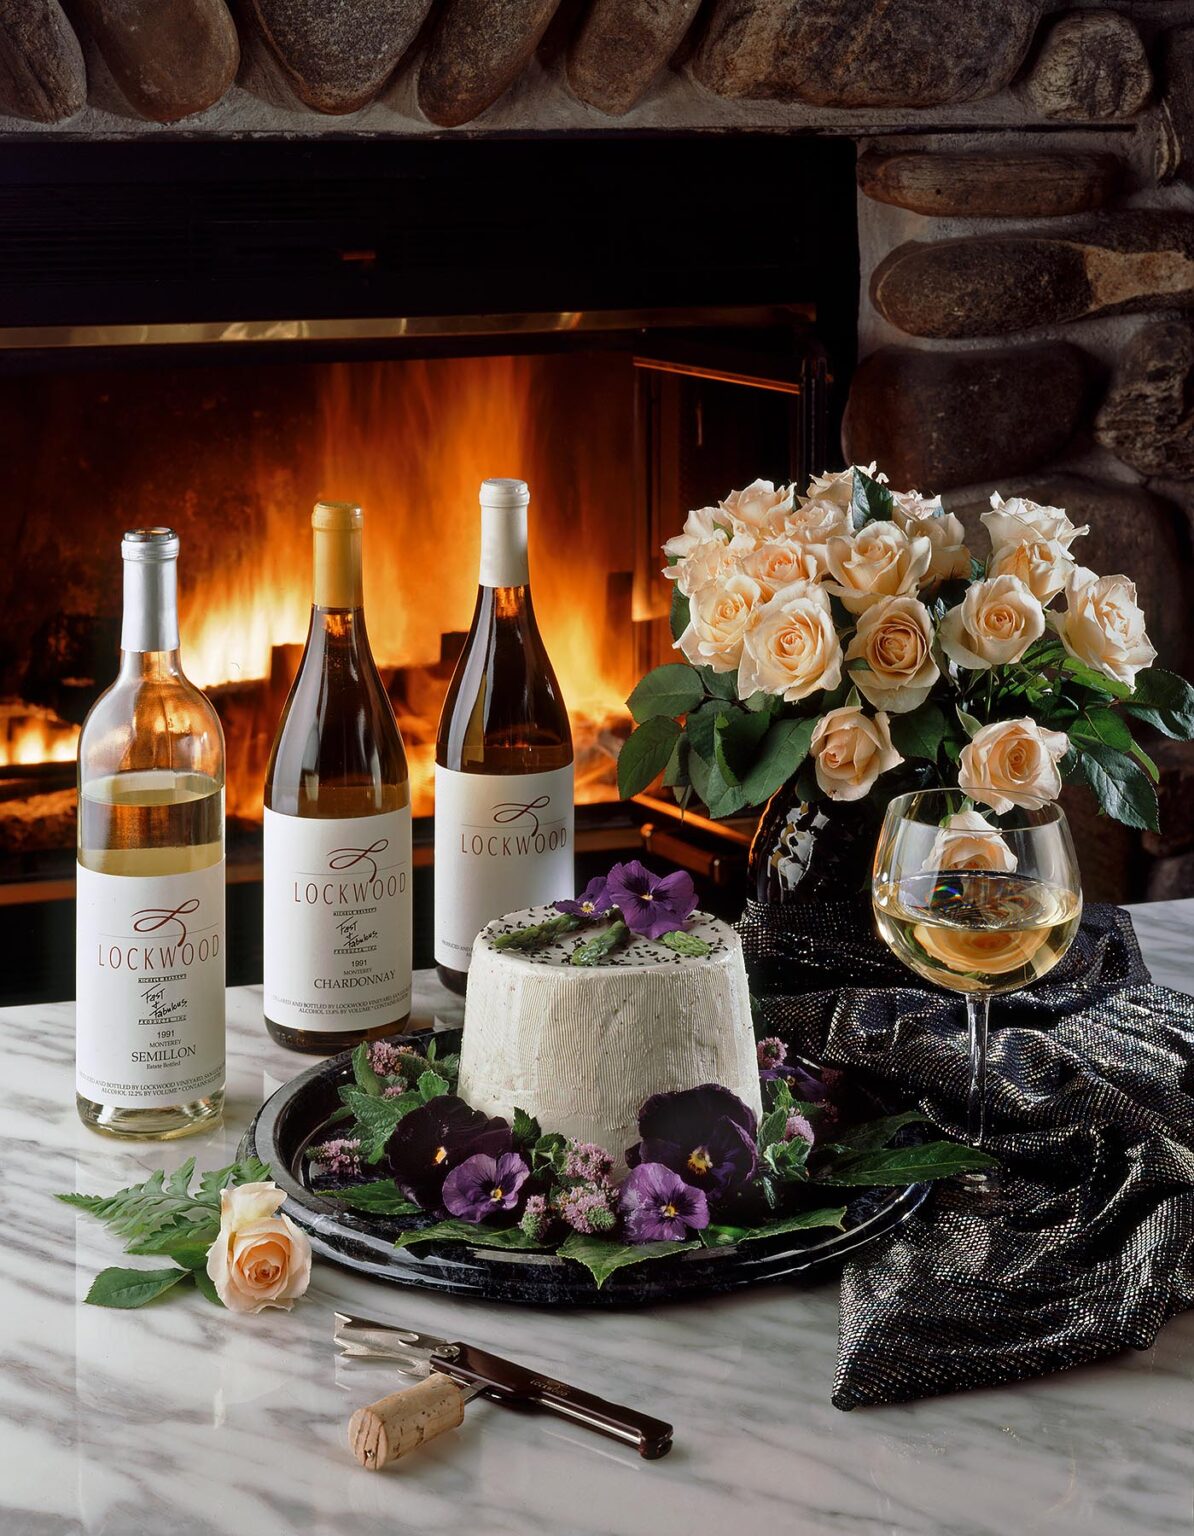 LOCKWOOD VINEYARD WINES with CHEESE and ROSES backlit by warm FIREPLACE